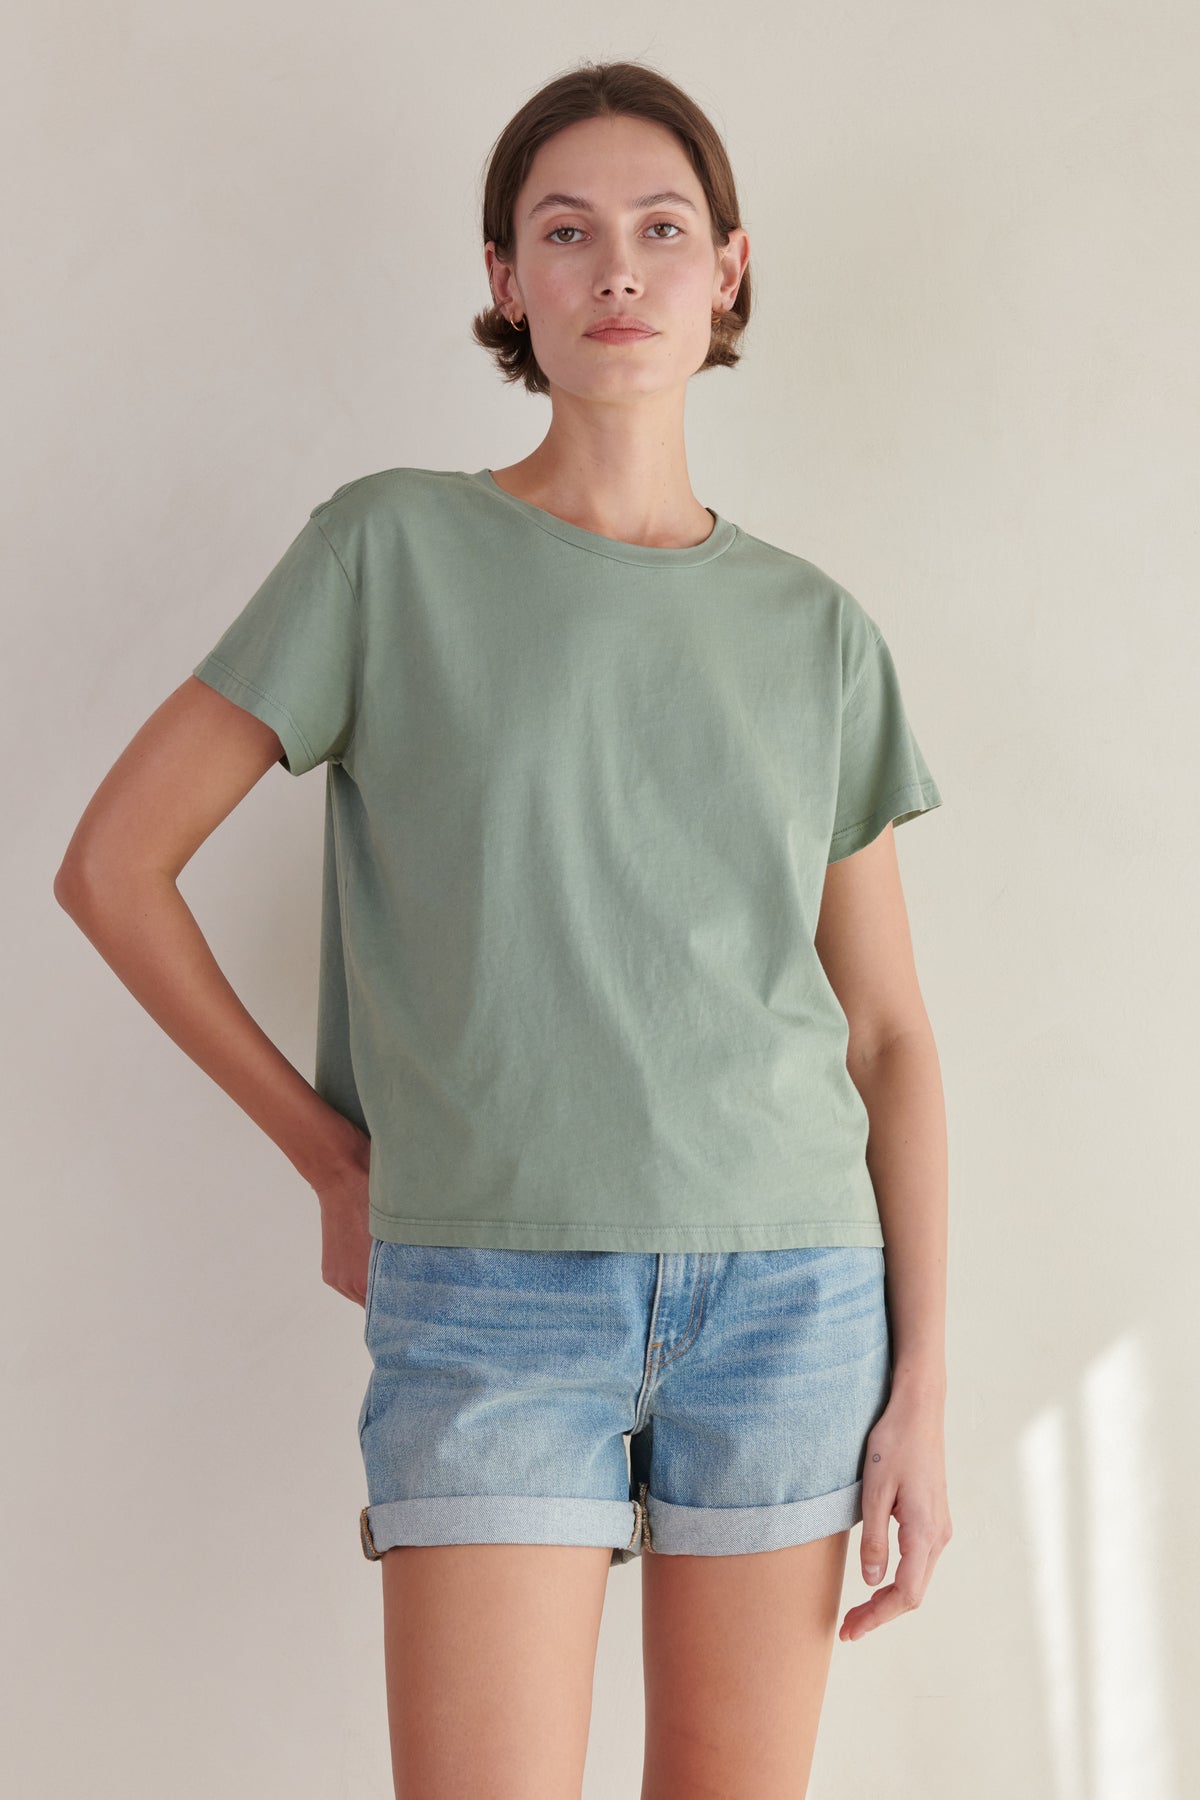 the model is wearing a Velvet by Jenny Graham sage green TOPANGA Tee and denim shorts.-26403955212481